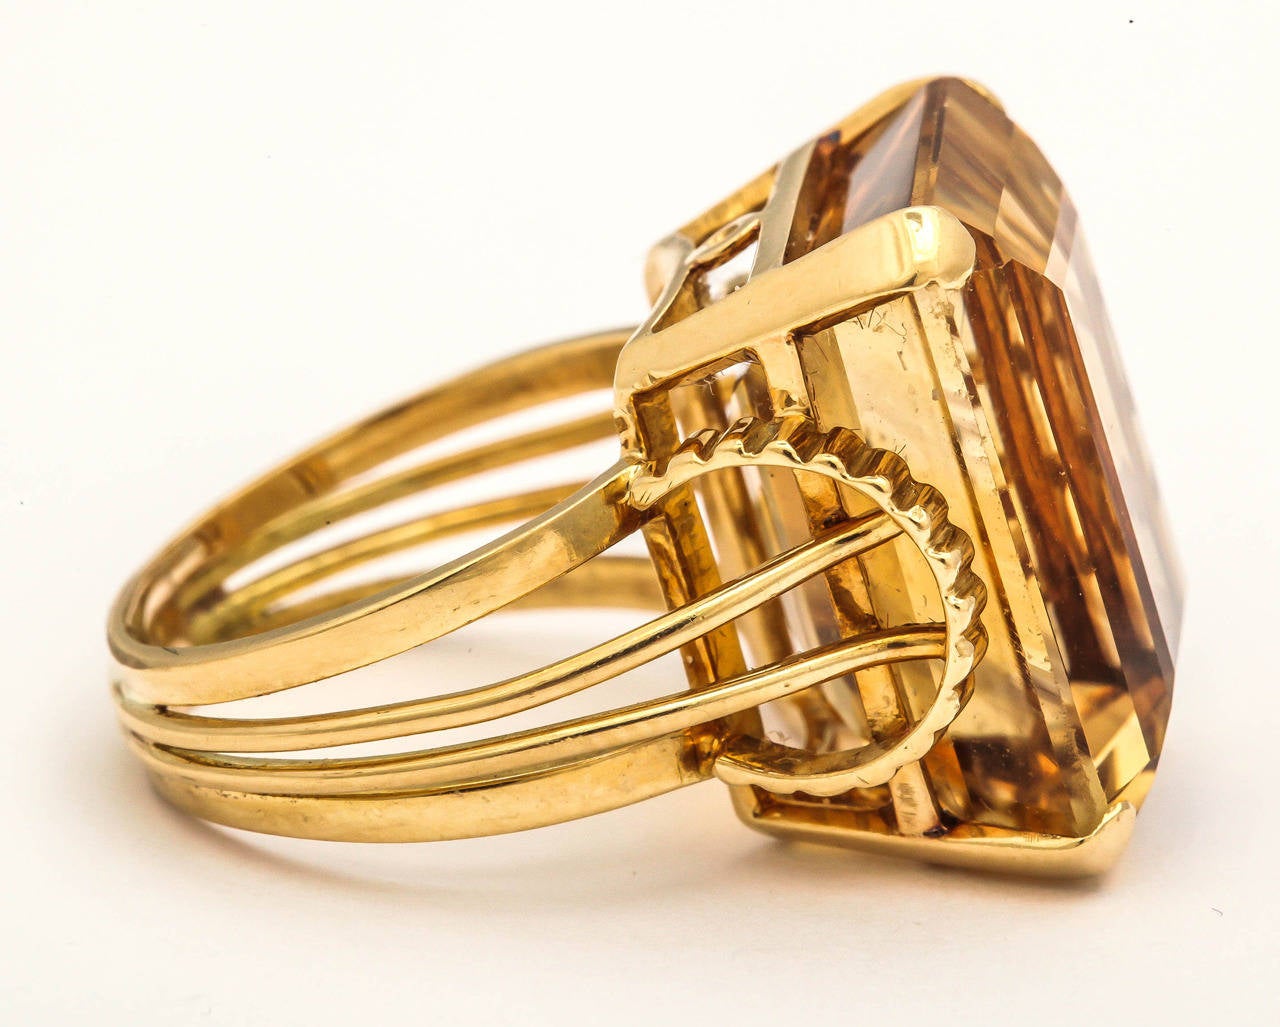  English  Retro Citrine Gold  Ring  1950s For Sale at 1stdibs